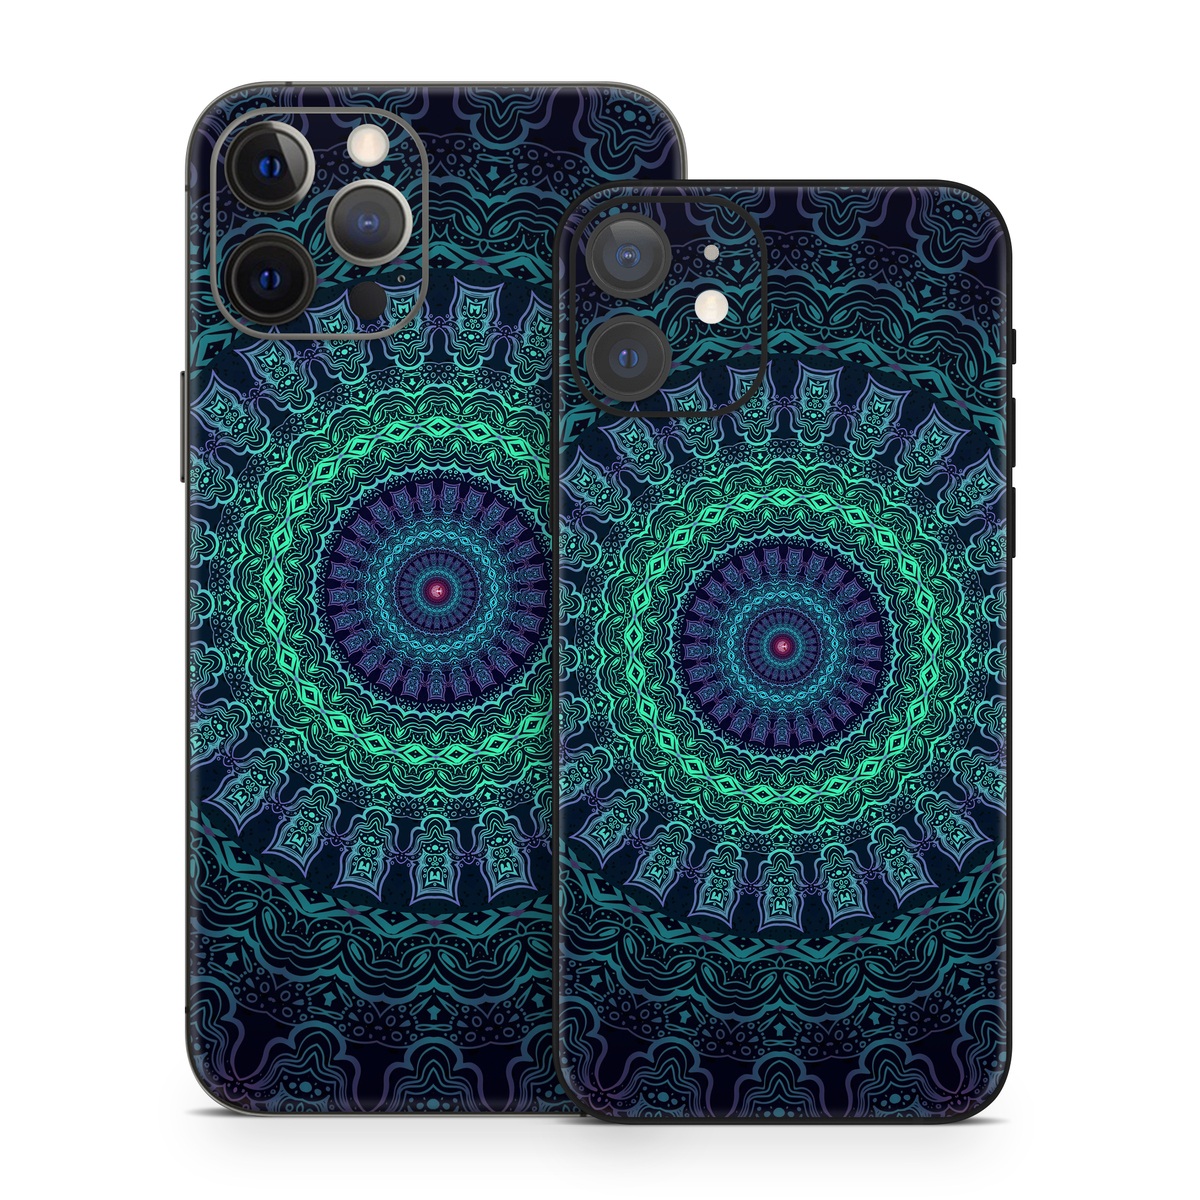 iPhone 12 Skin design of Colorfulness, Blue, Green, Pattern, Teal, Turquoise, Art, Electric Blue, Aqua, Circle, Majorelle Blue, Visual Arts, Fractal Art, Design, Symmetry, Psychedelic Art, Graphics, Kaleidoscope, Motif with black, green, red colors